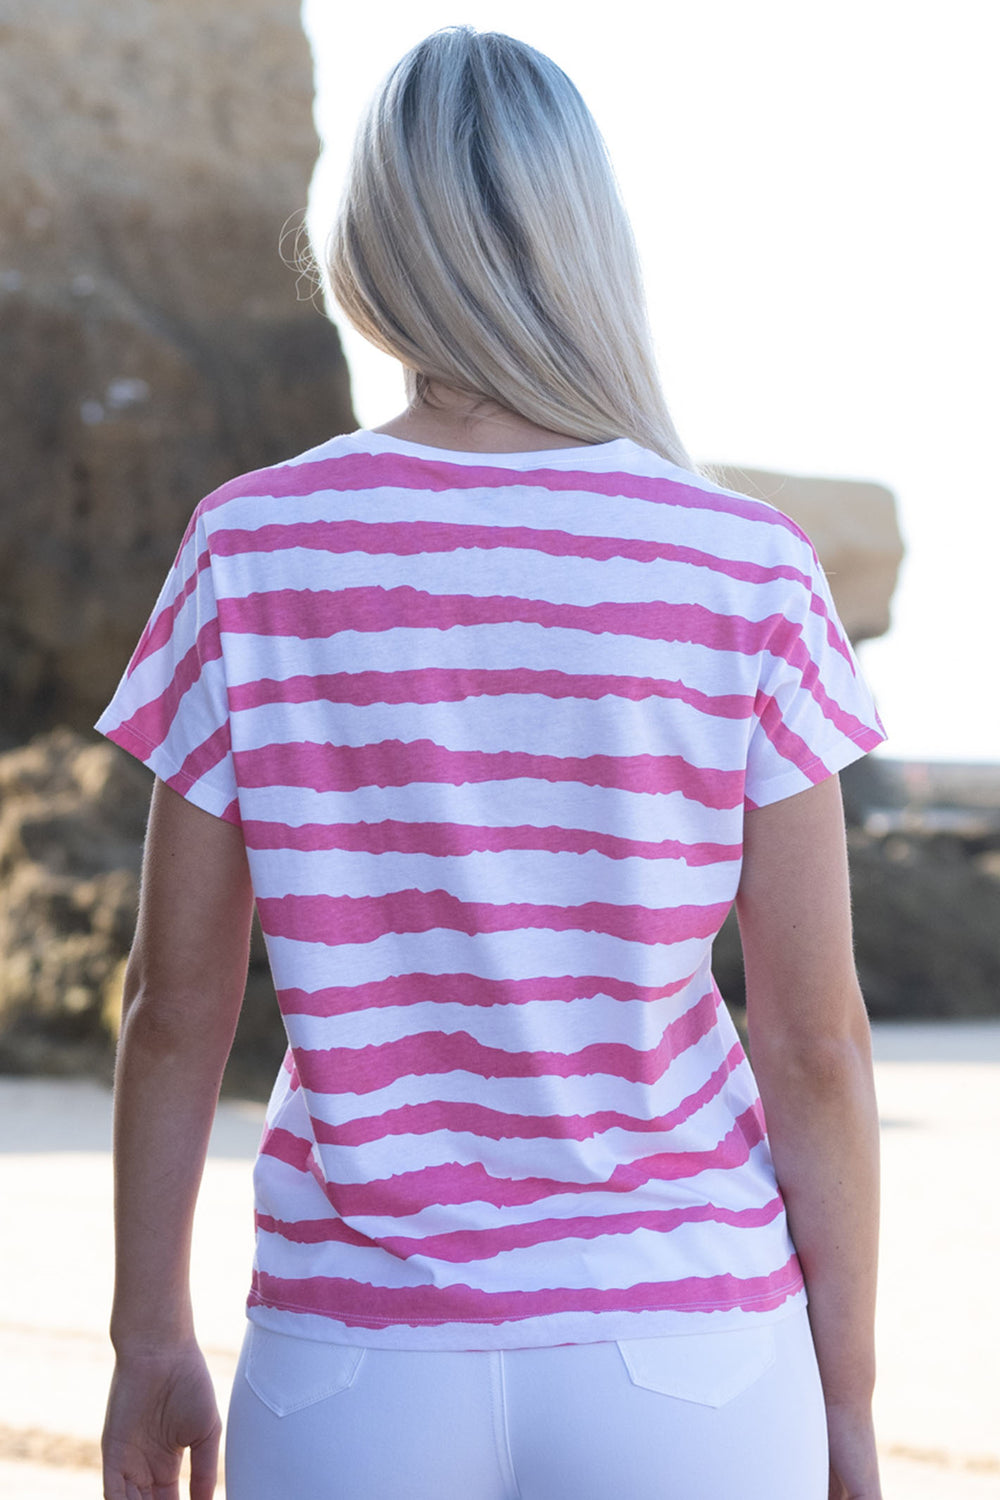 Marble Fashions 7364 135 Pink & White Stripe T-Shirt - Experience Boutique